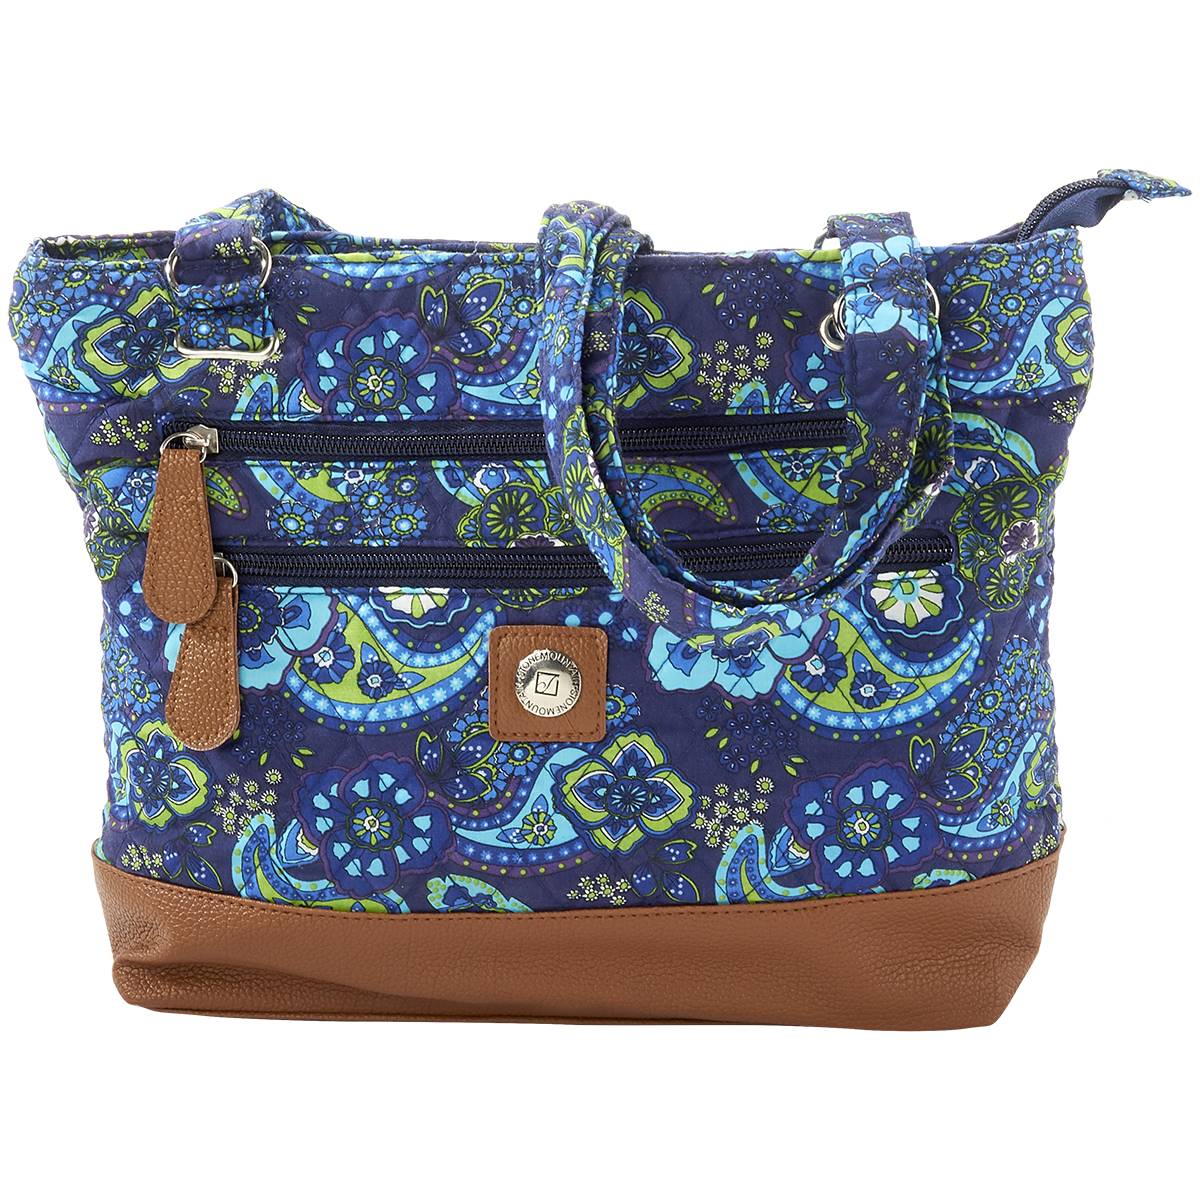 Stone Mountain Floral Paisley Quilted Donna Tote - image 1